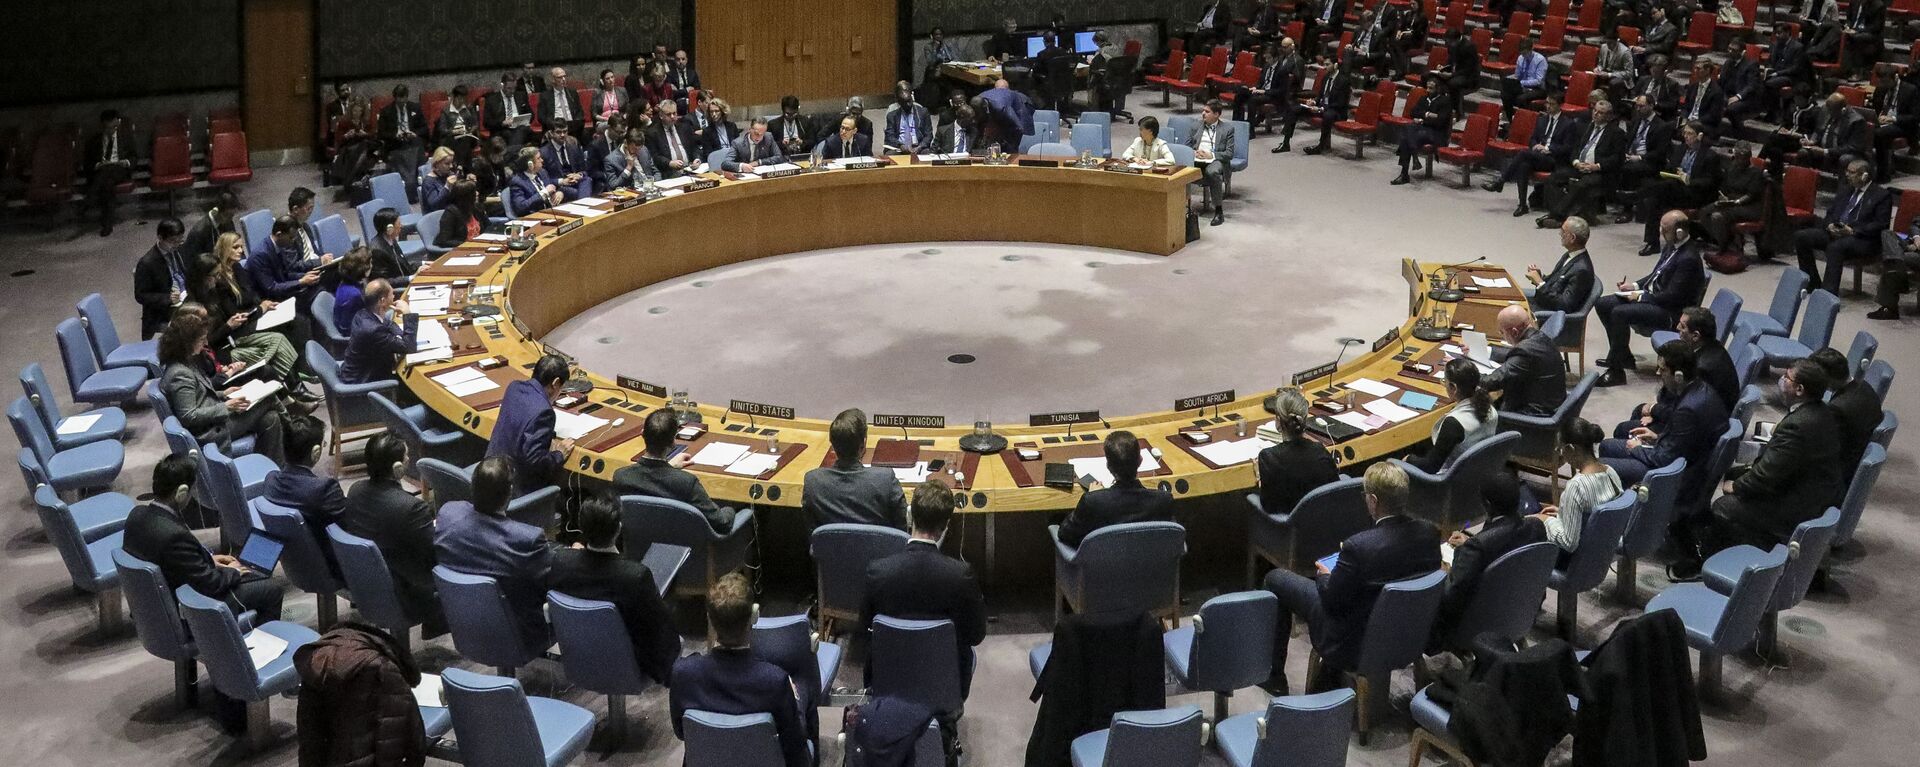 Members of the United Nations Security Council, with visiting German Foreign Minister Heiko Maas, convene a meeting on the nuclear non-proliferation treaty, Wednesday, Feb. 26, 2020, at U.N. headquarters - Sputnik International, 1920, 23.09.2021